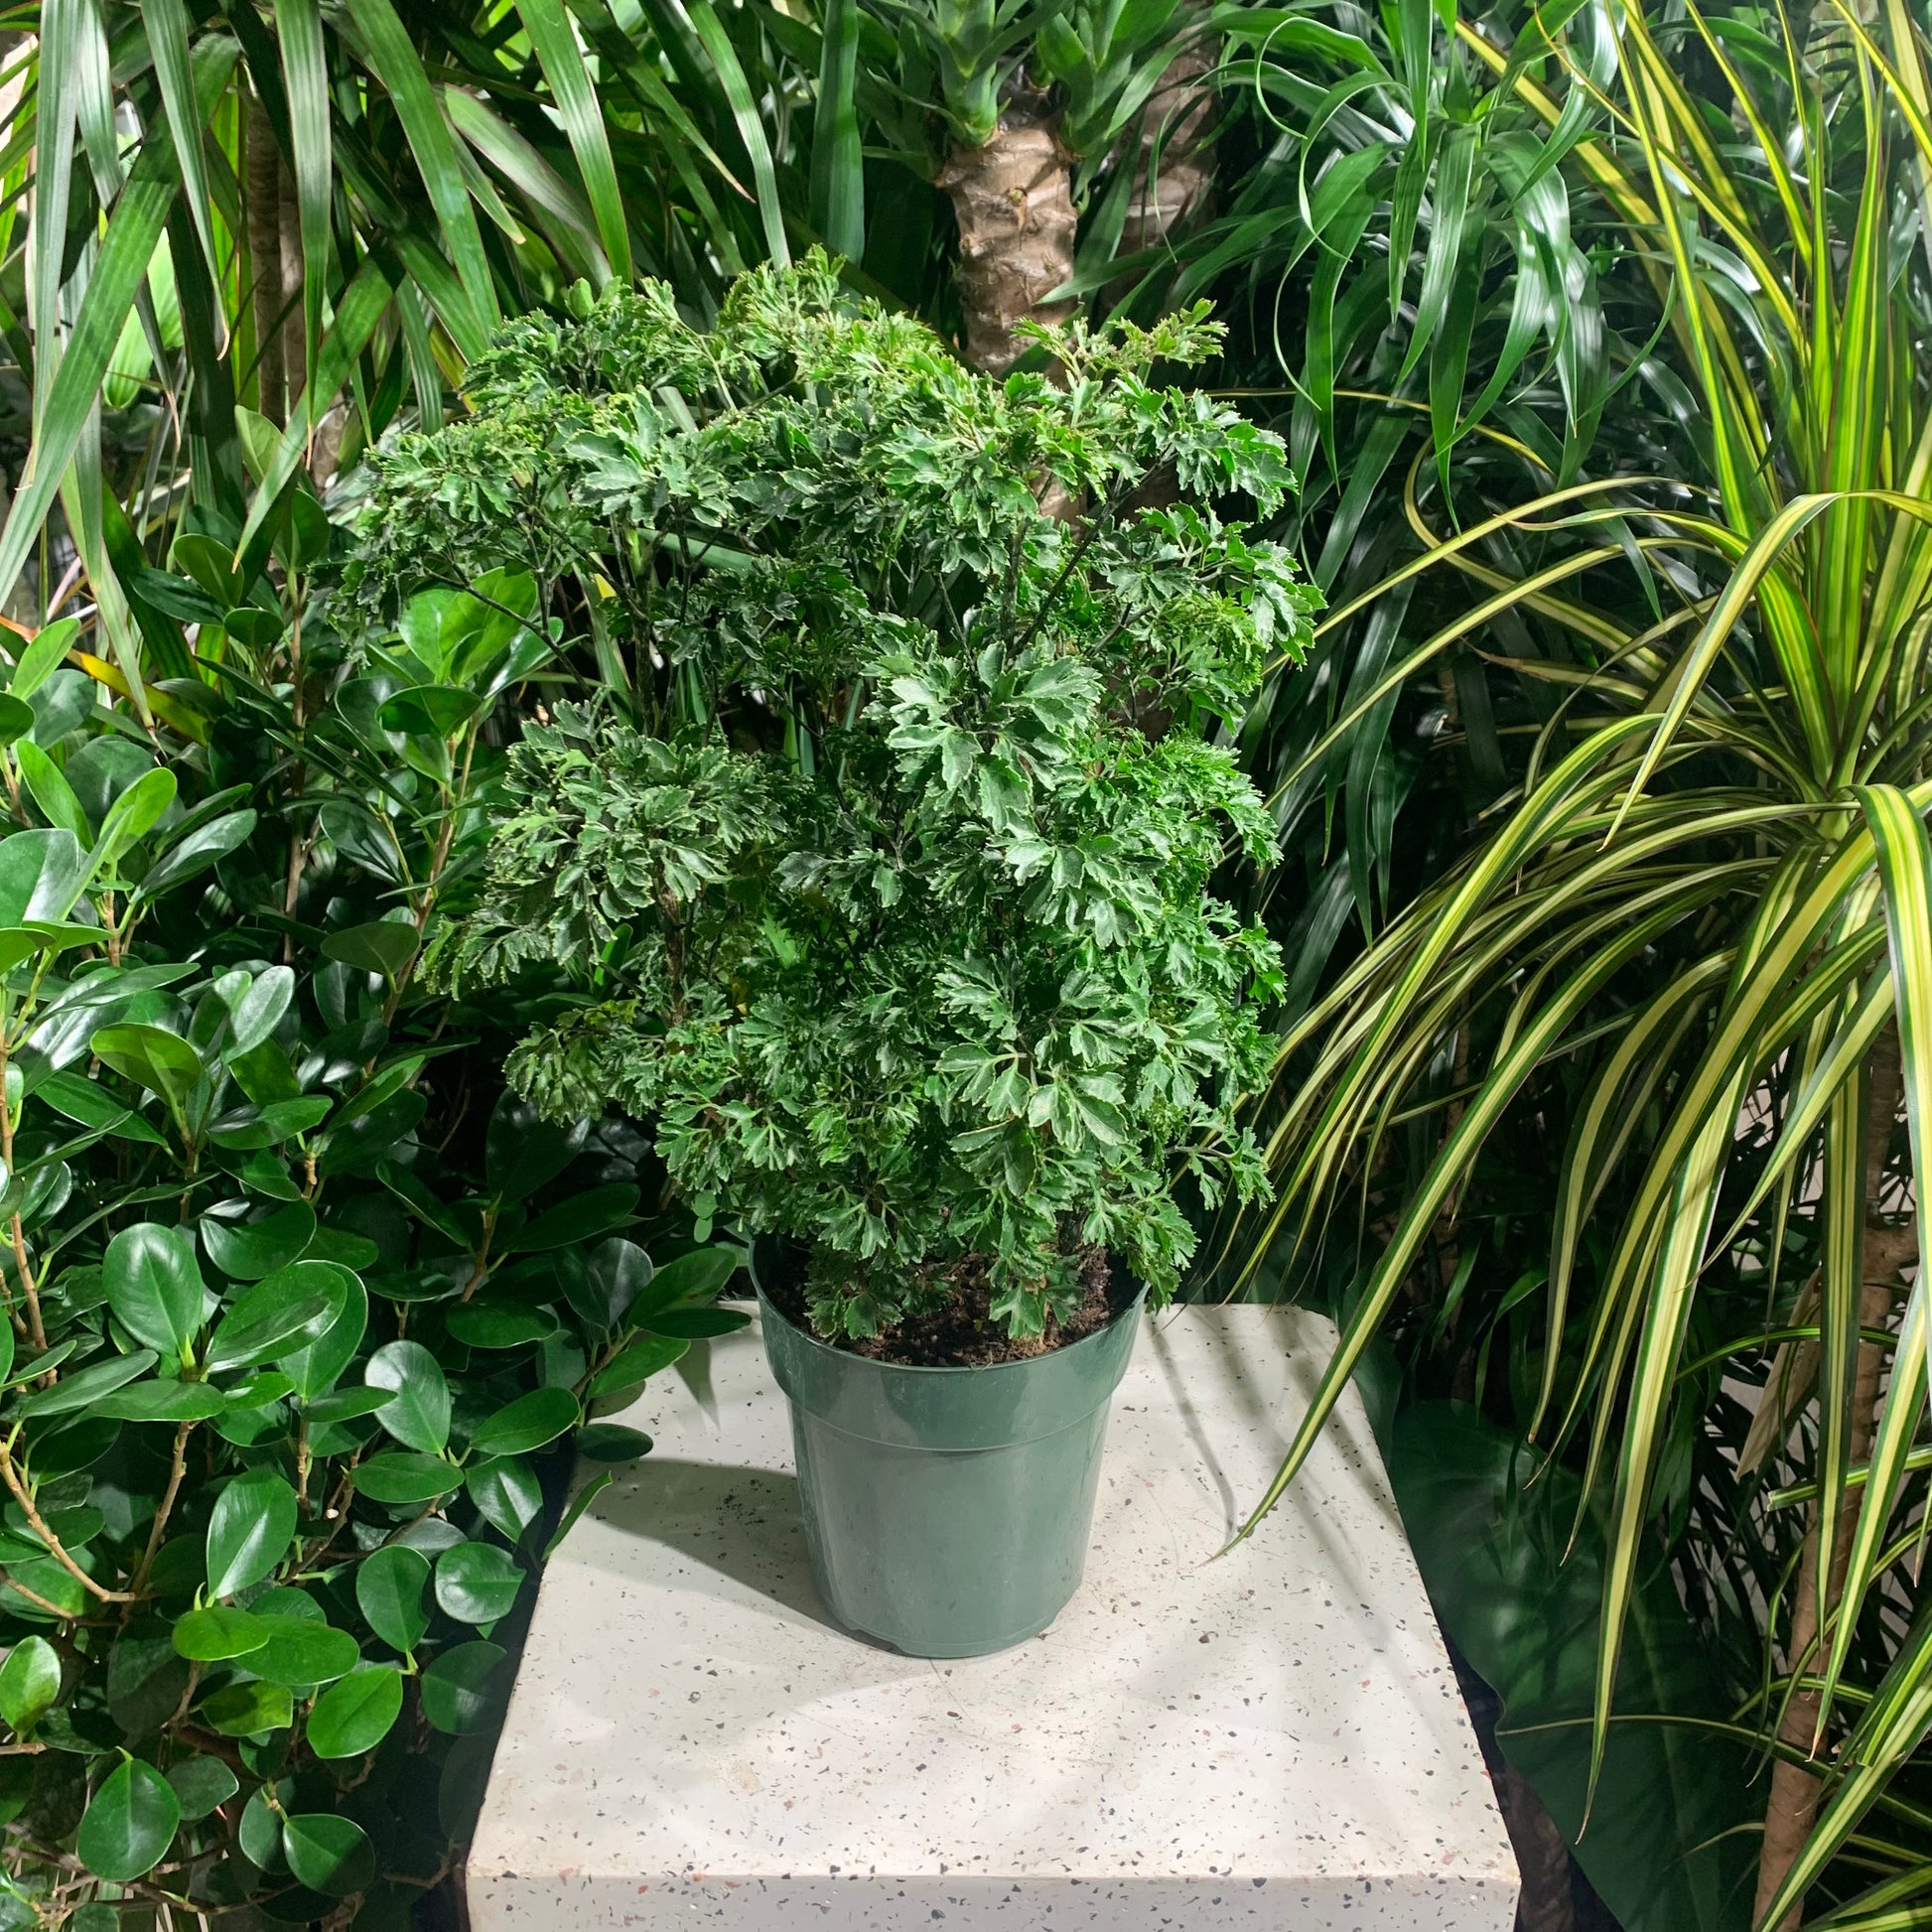 Parsley Aralia (Polyscias fruticosa) in a 6 inch pot. Indoor plant for sale by Promise Supply for delivery and pickup in Toronto